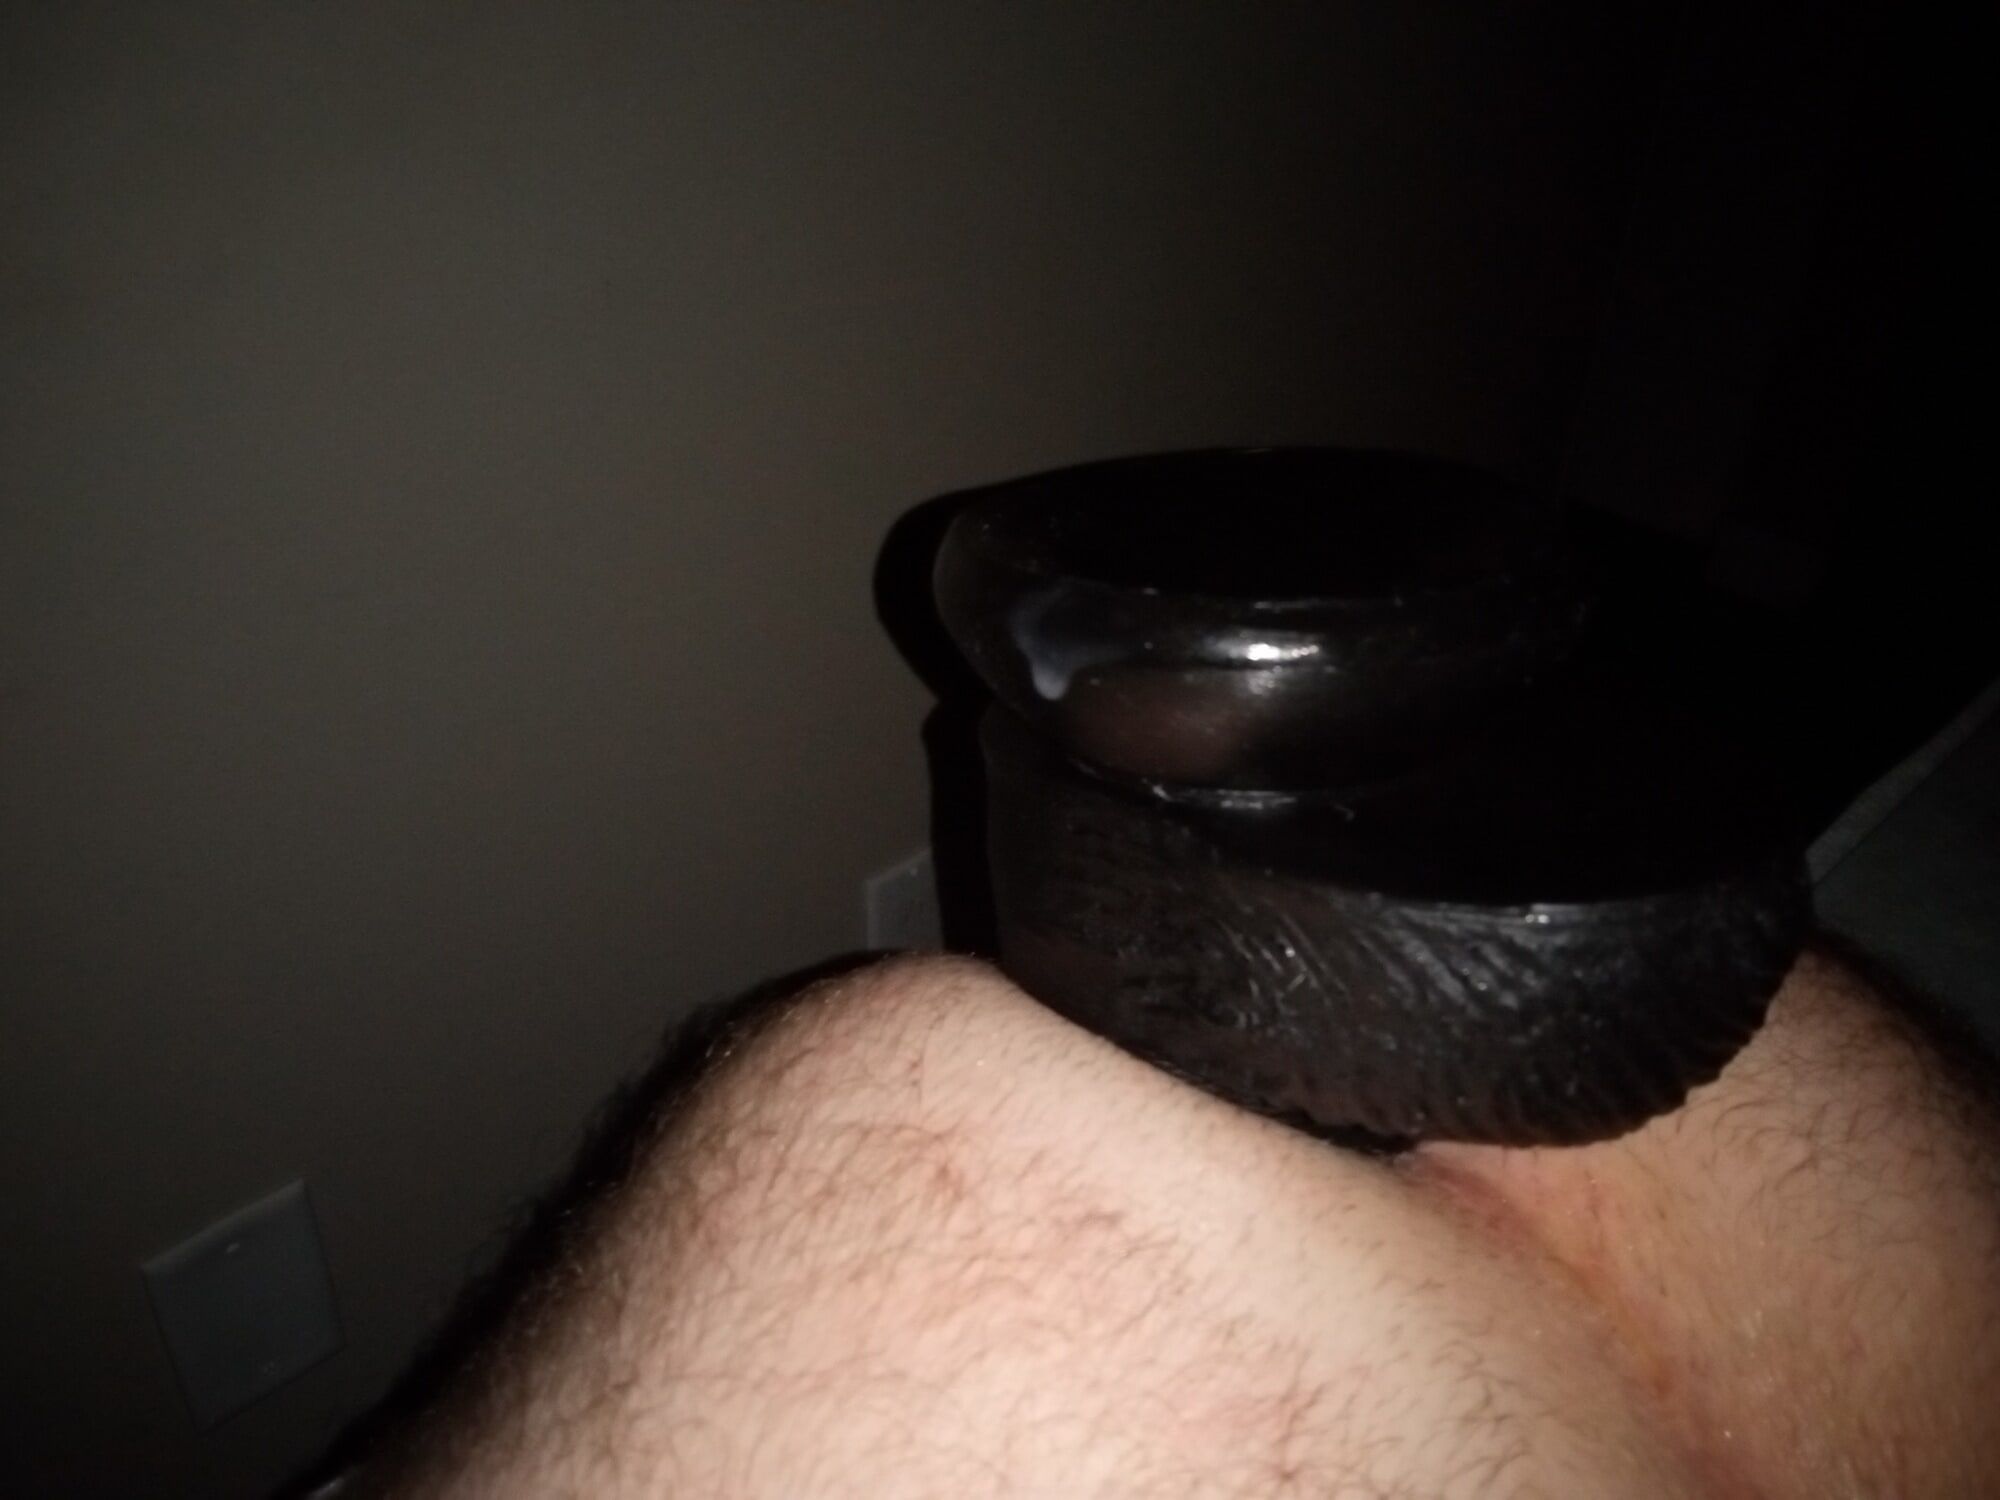 More dildos gaping my hole #4